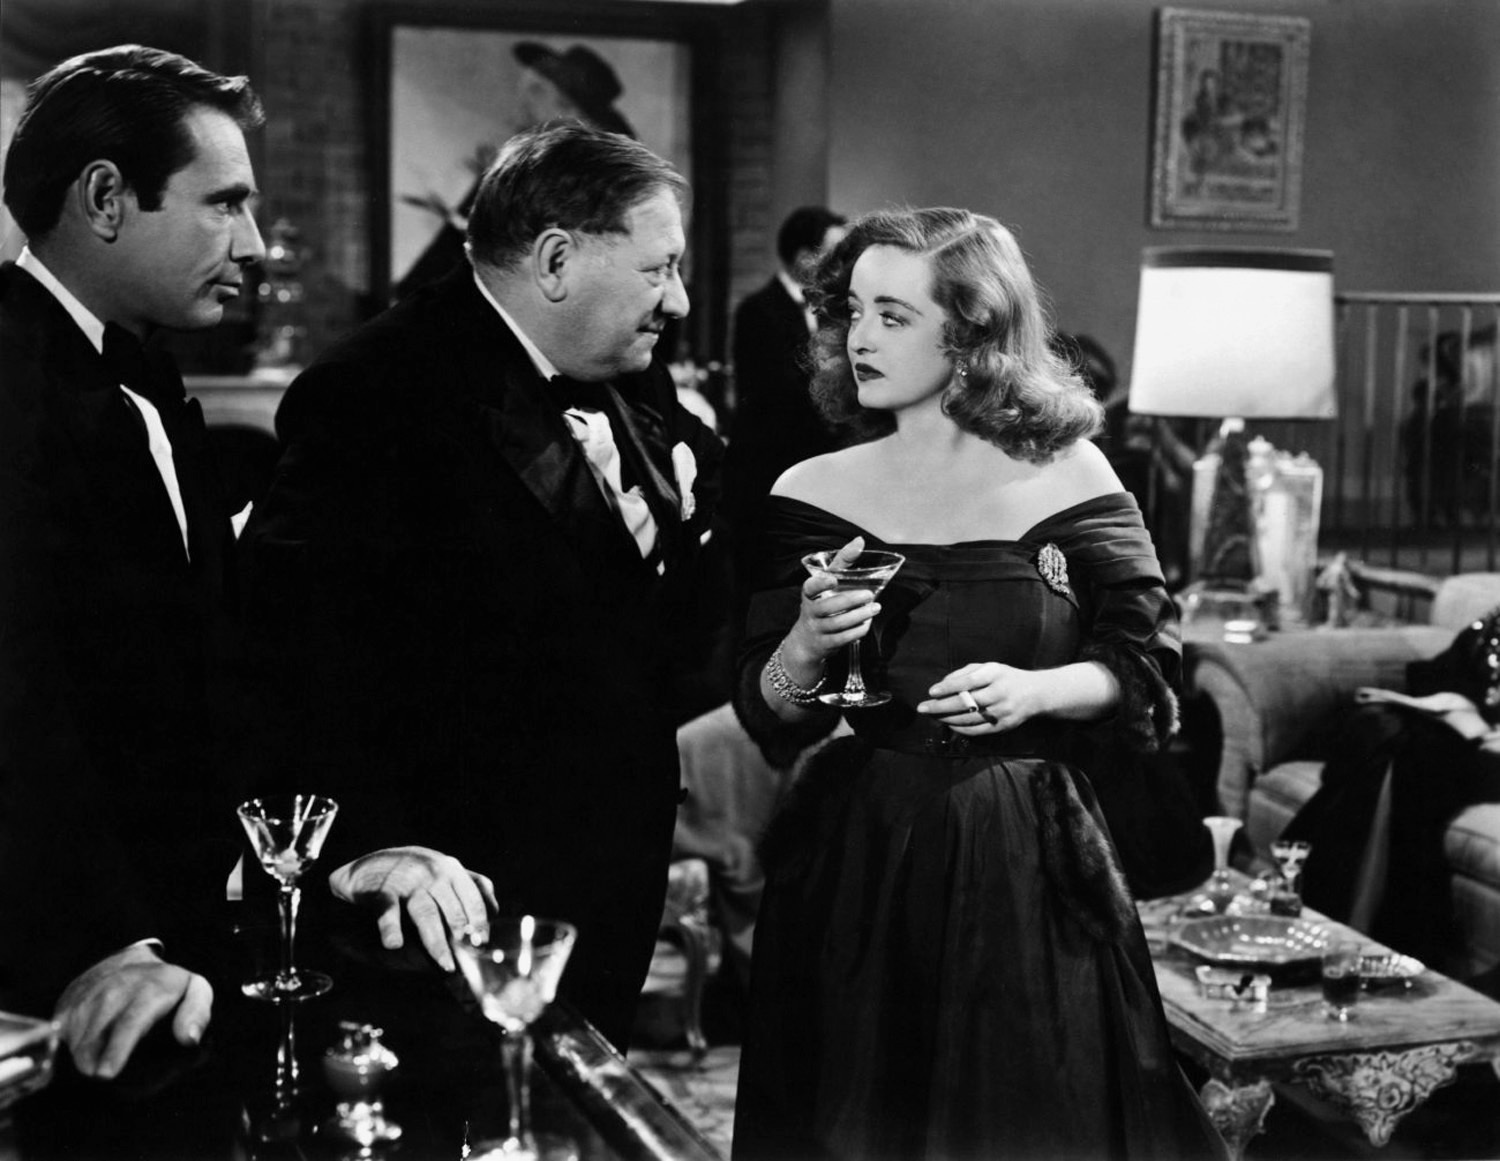 All About Eve About Eve Photo